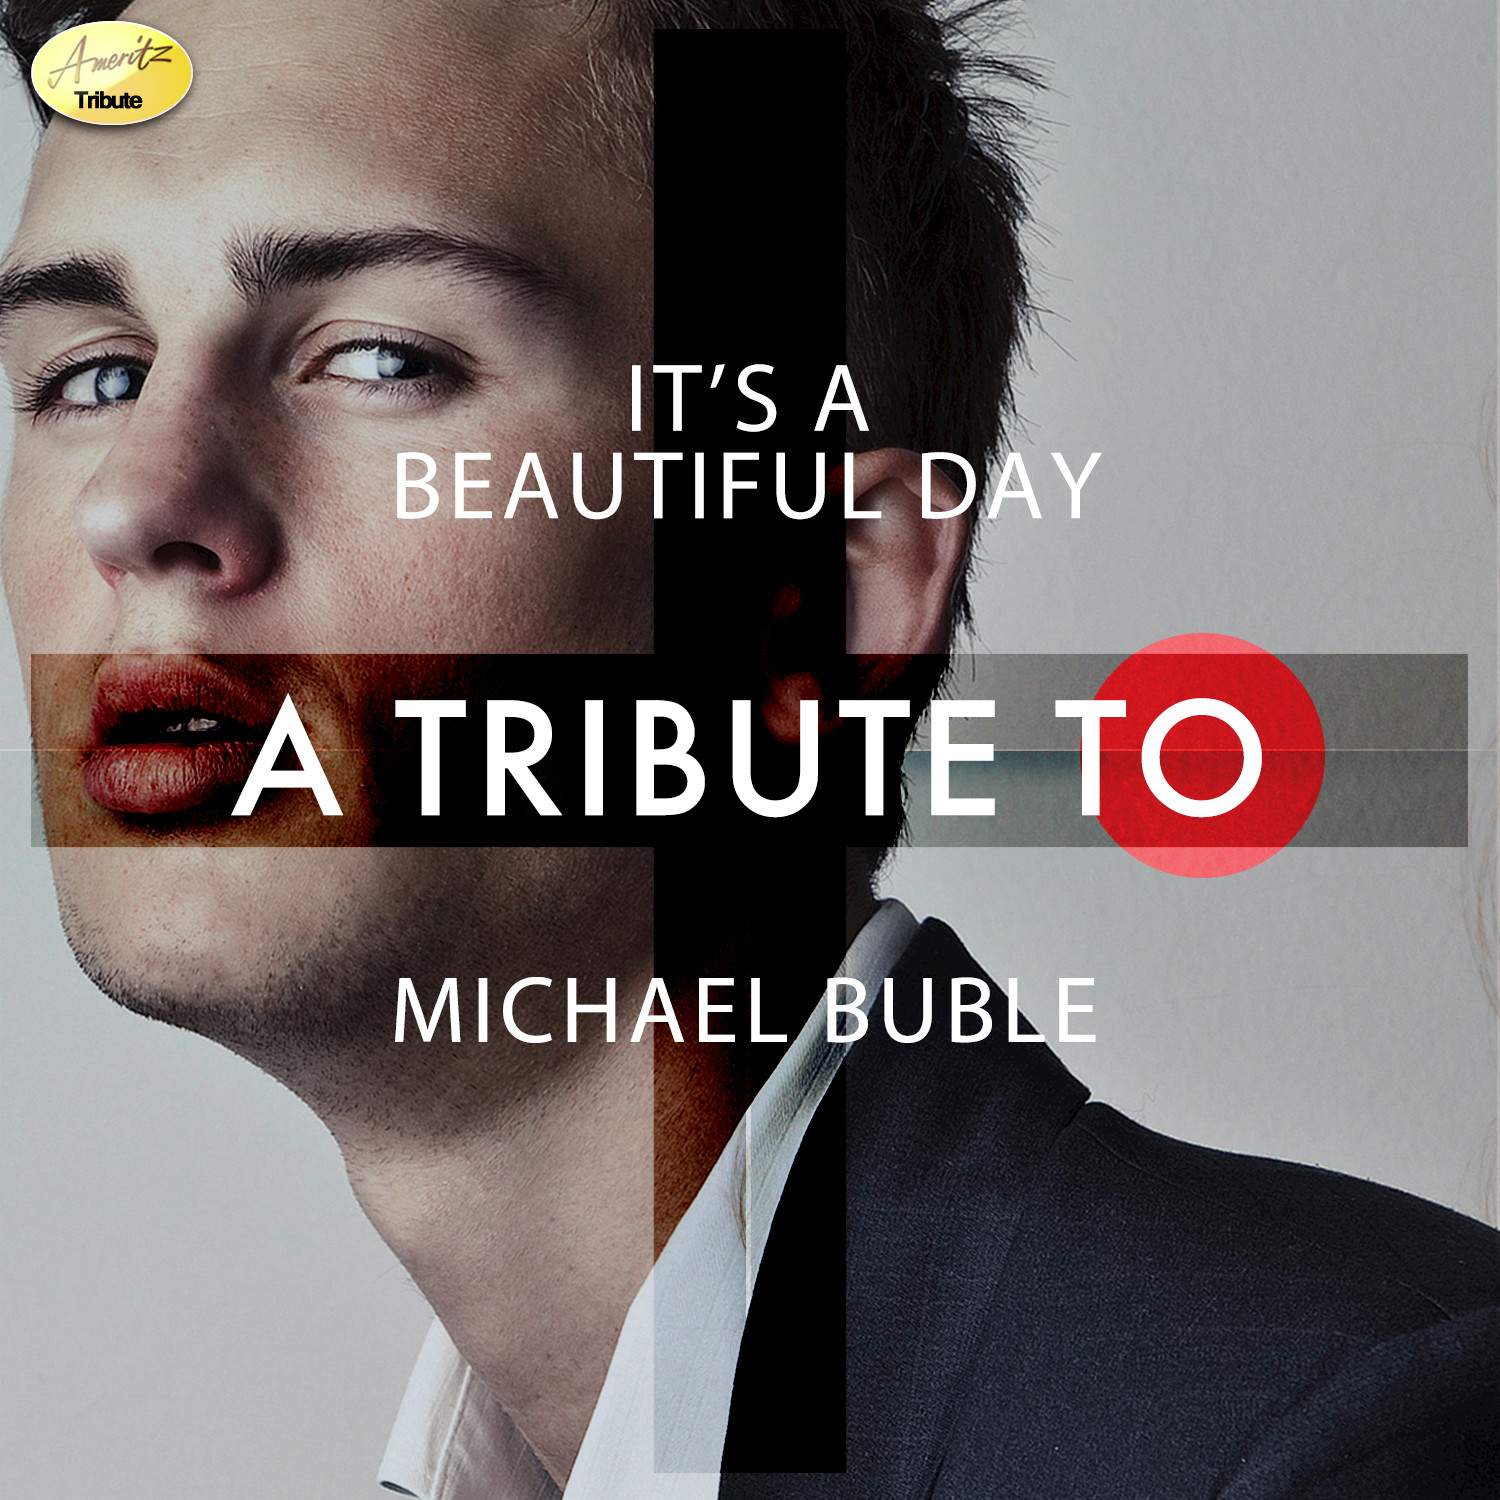 It's a Beautiful Day - A Tribute to Michael Buble